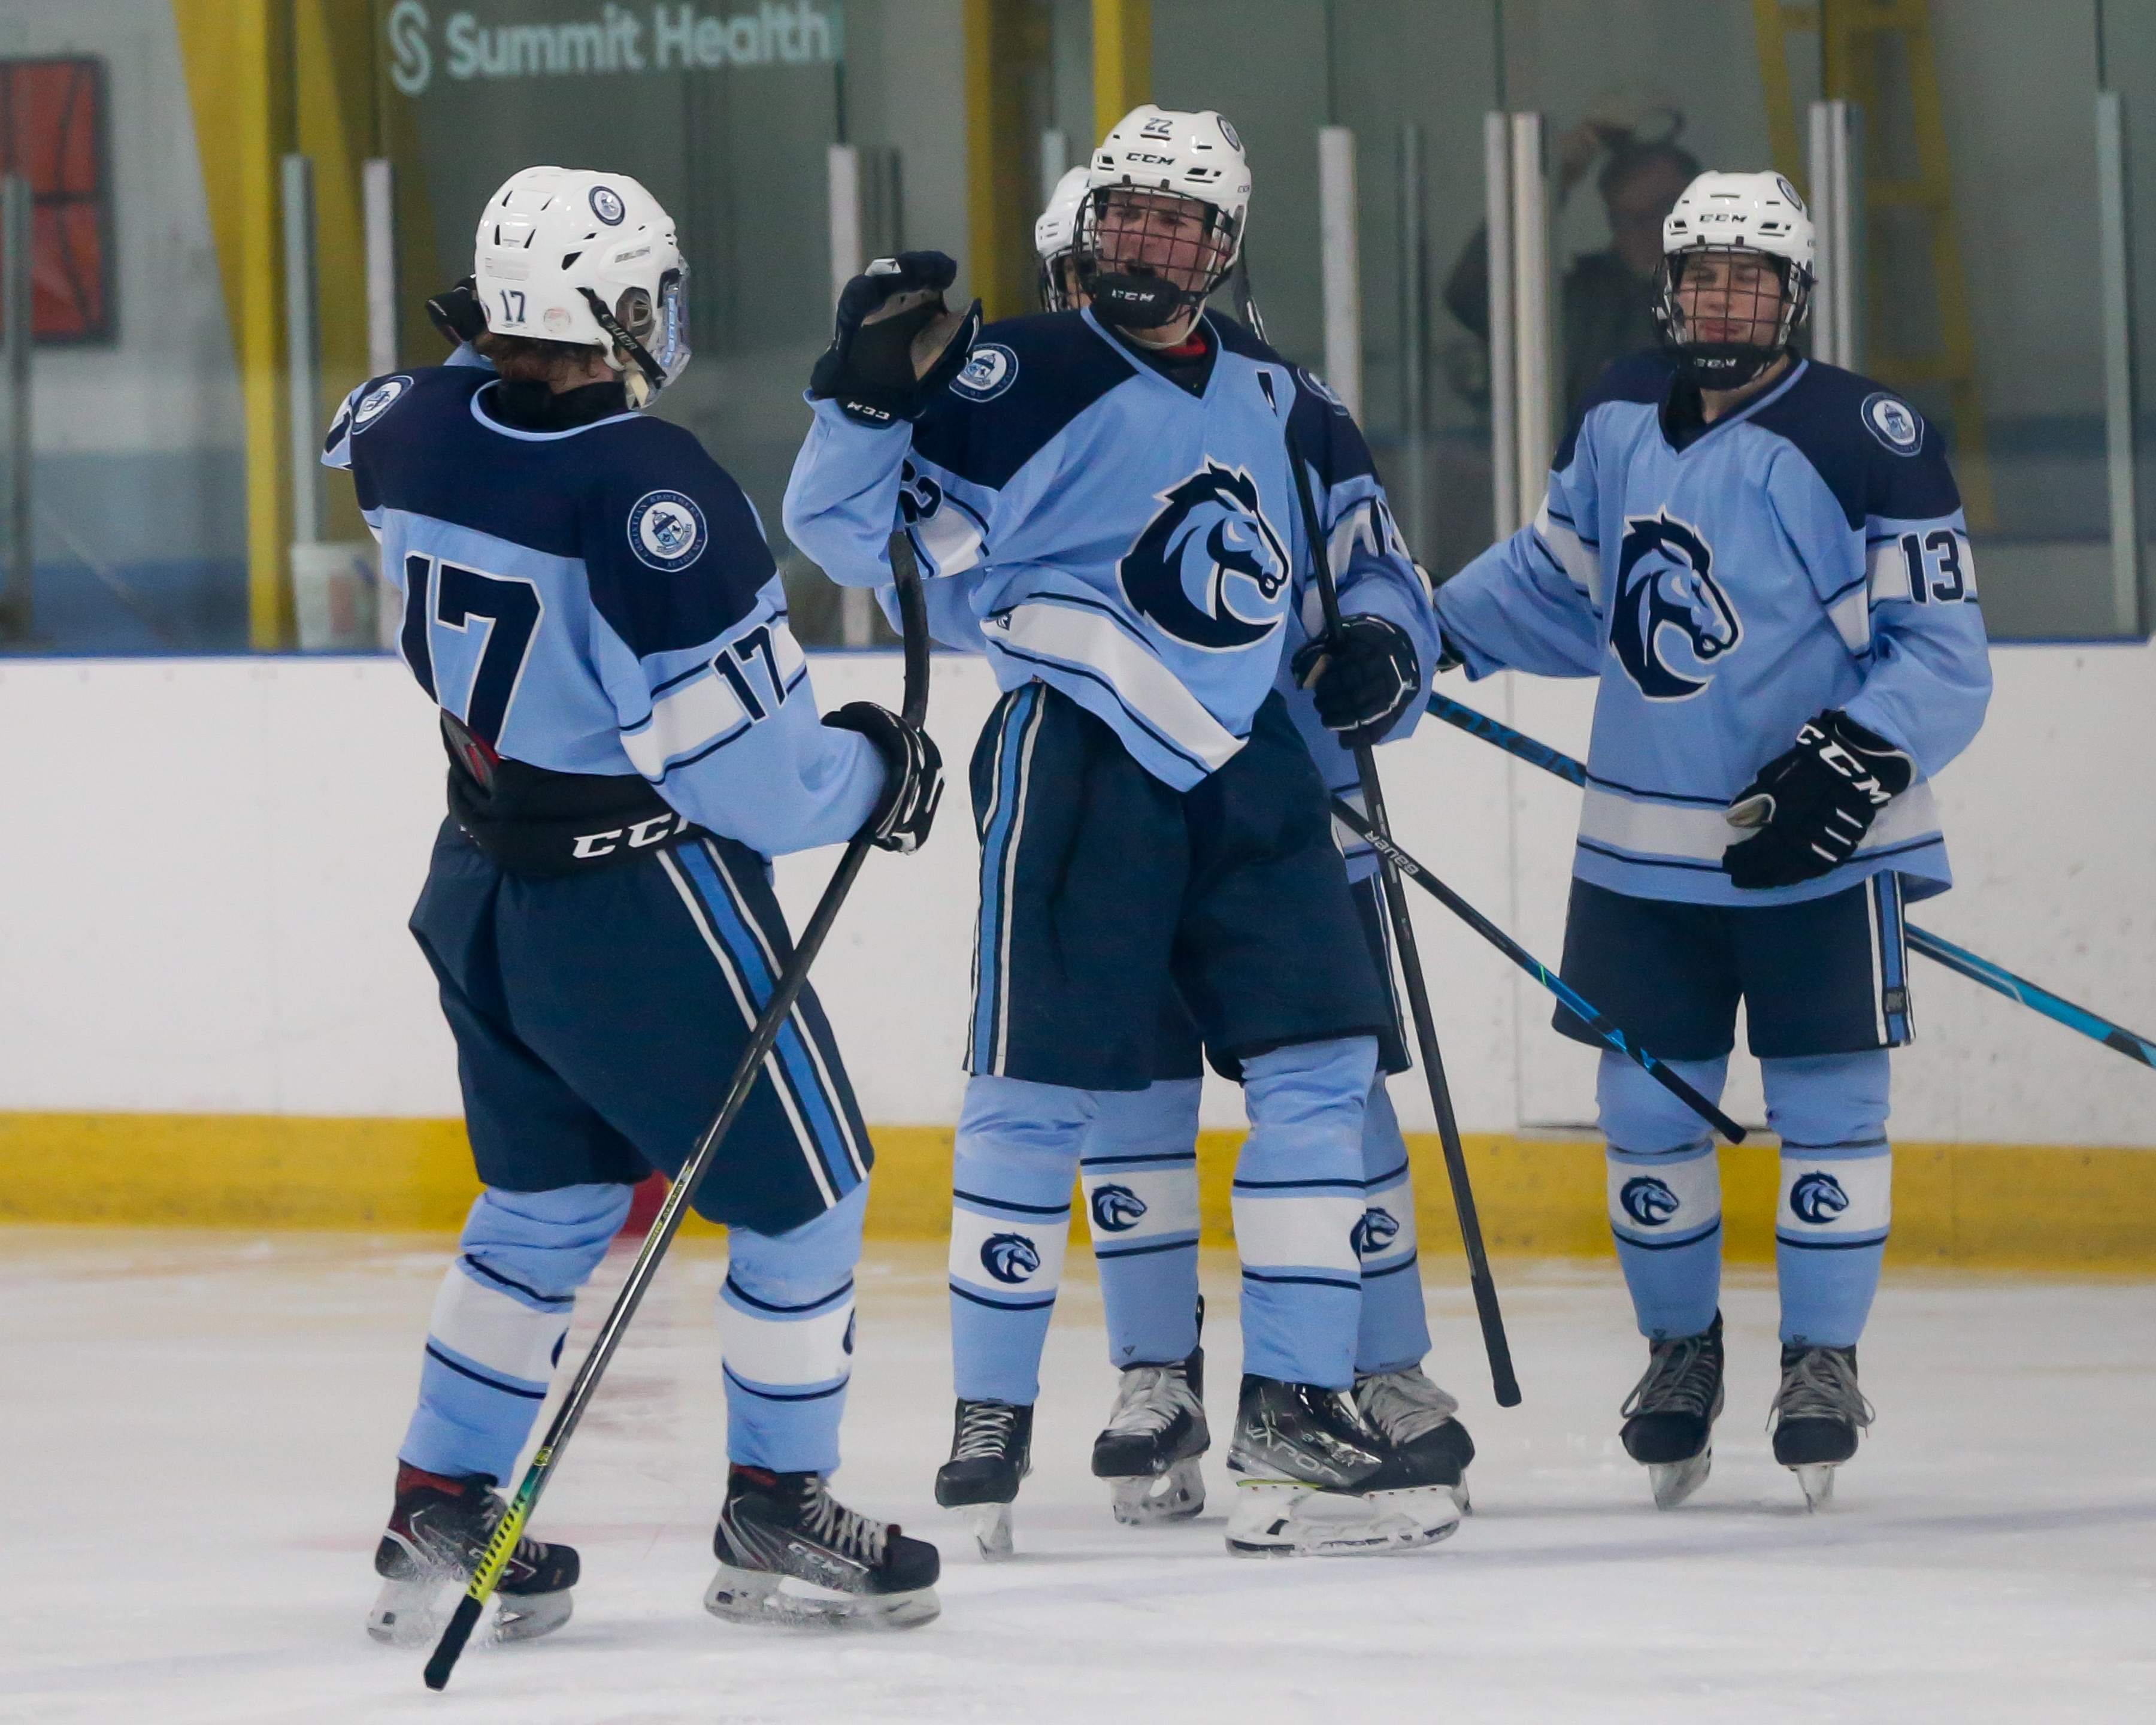 The Best Jerseys in Jersey: Your picks & ours for HS hockey's top sweaters  in 2021 